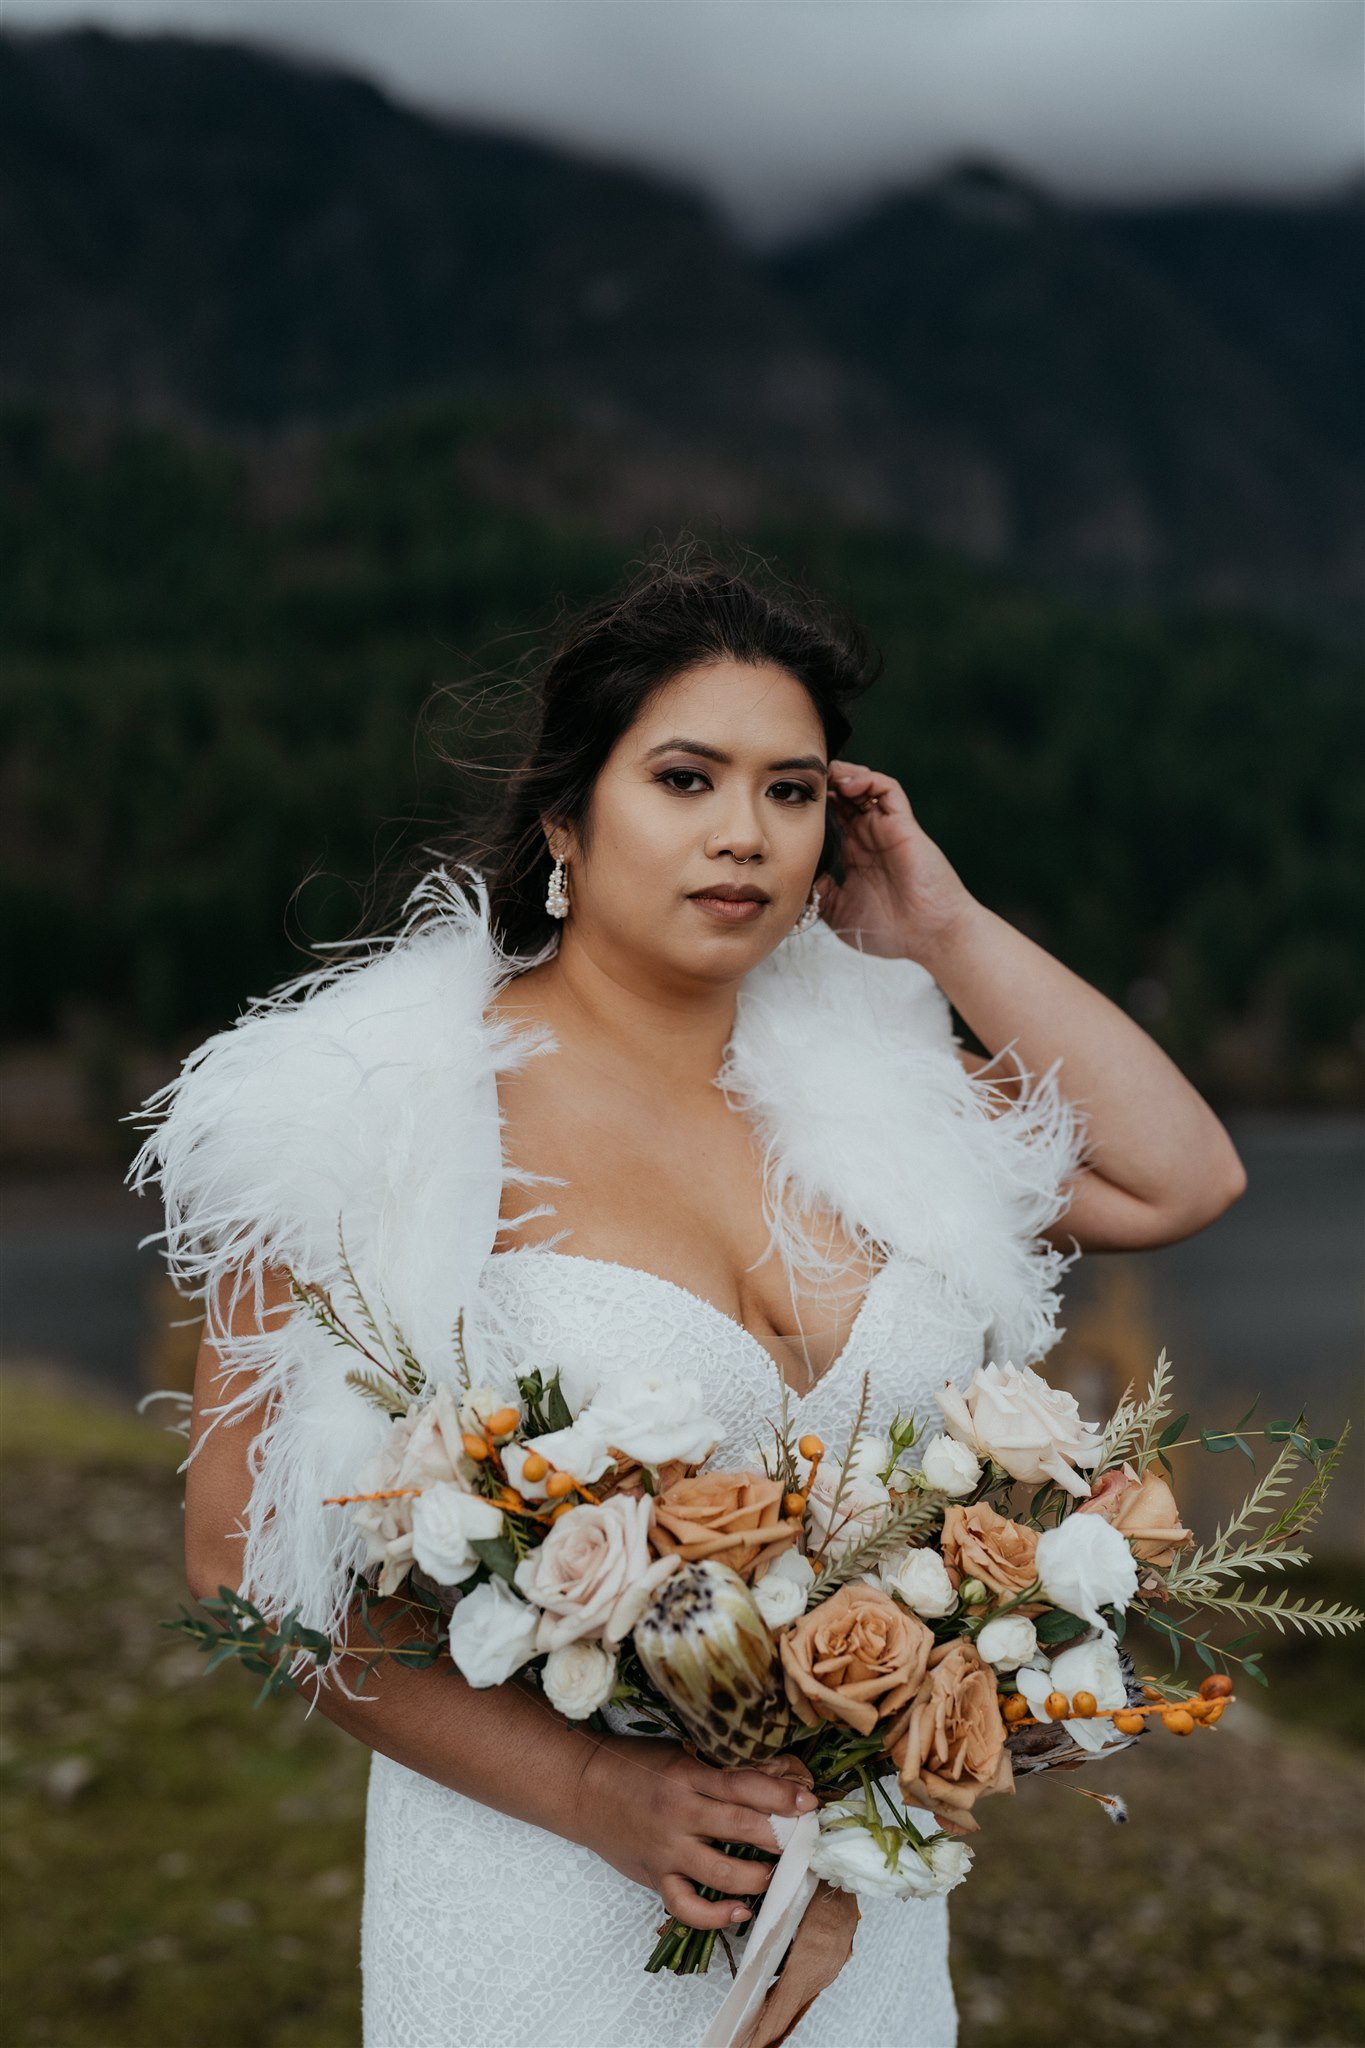 Bride holding white, rust and rose colored wedding bouquet